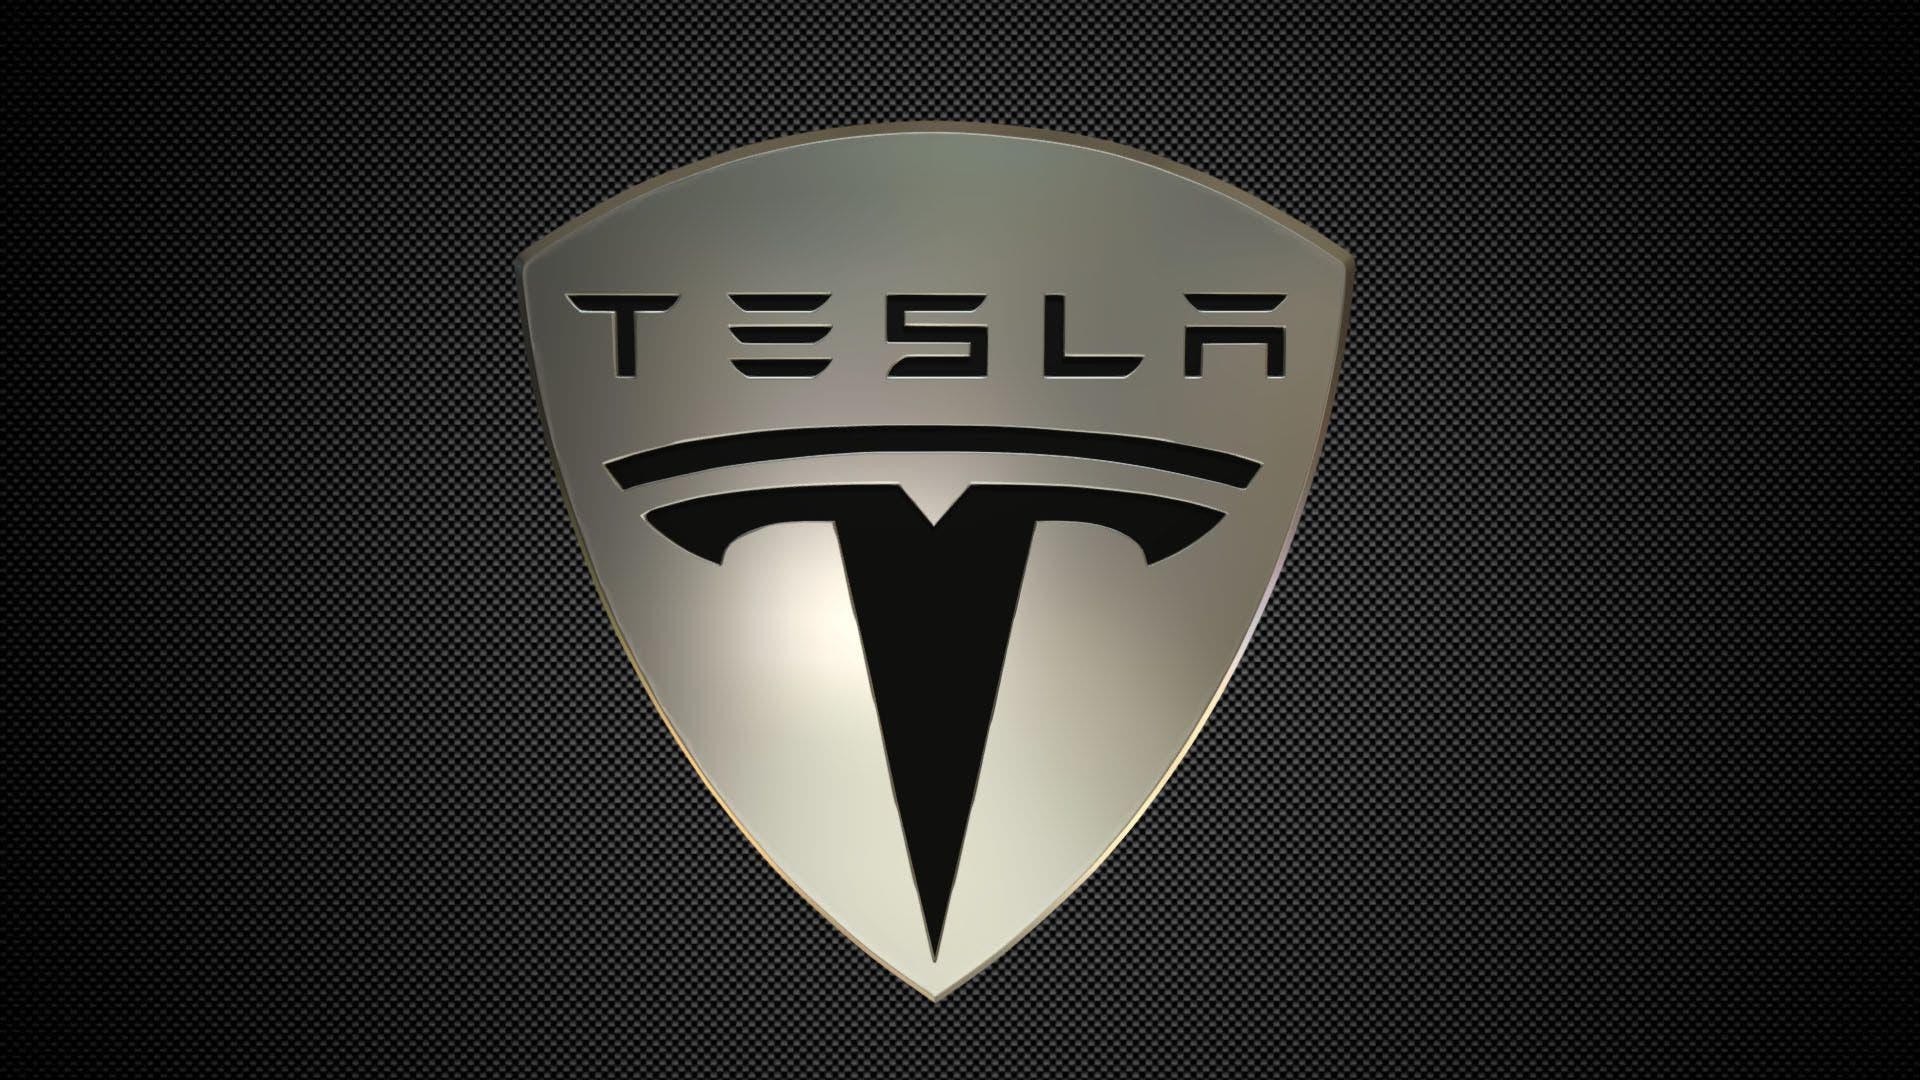 Tesla, Moderna And These 2 Stocks Insiders Are Selling